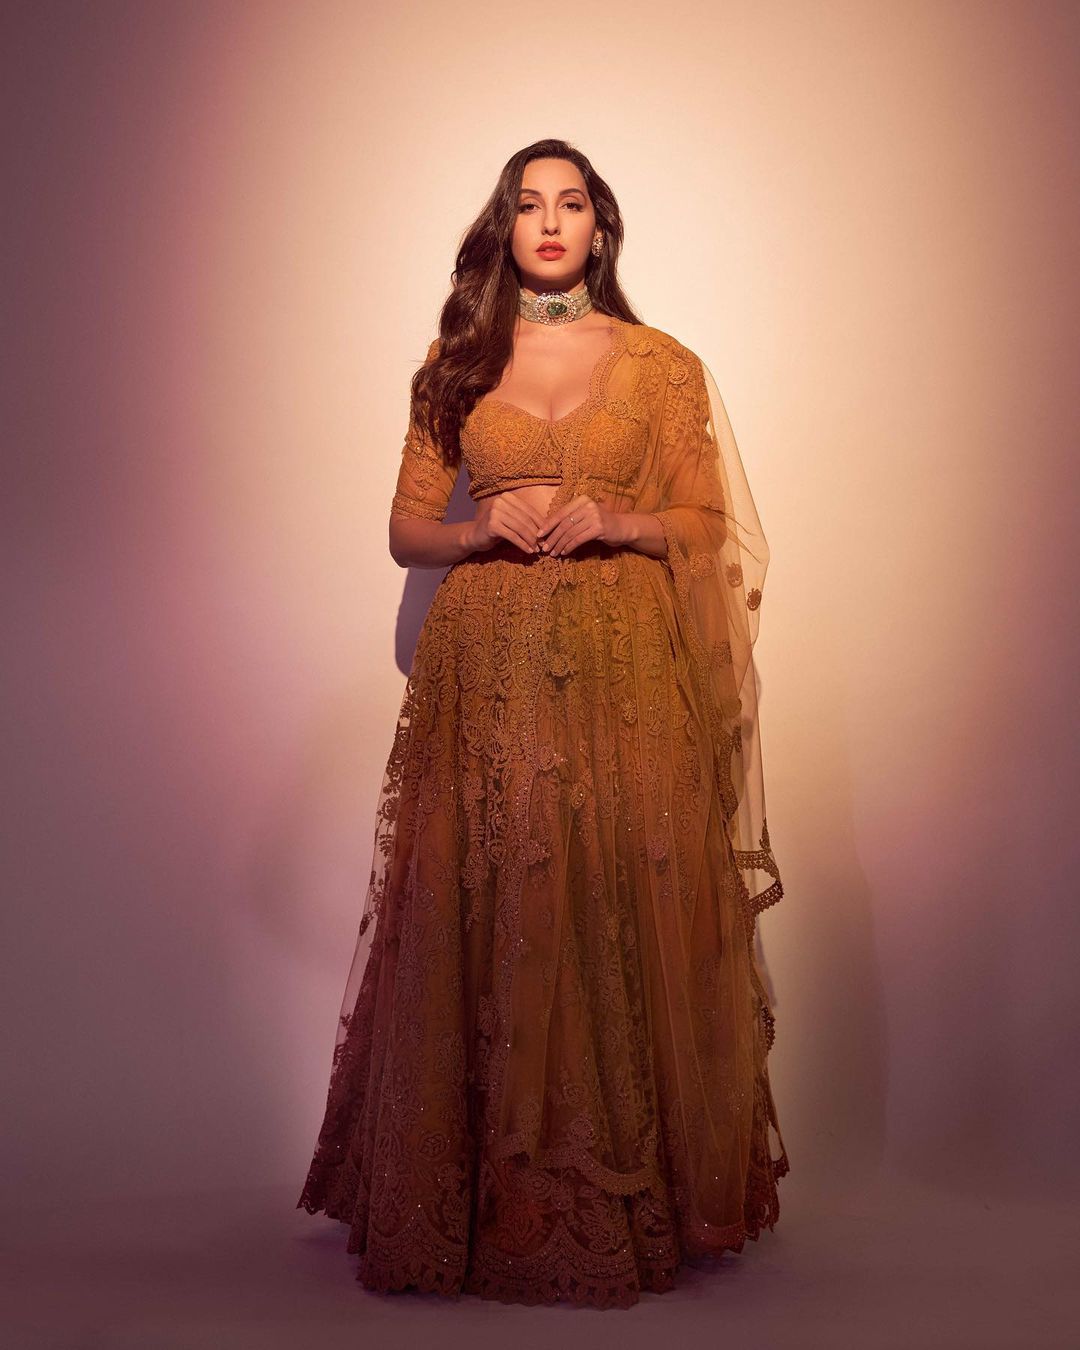 Nora Fatehi is a picture of elegance in the mustard coloured lehenga